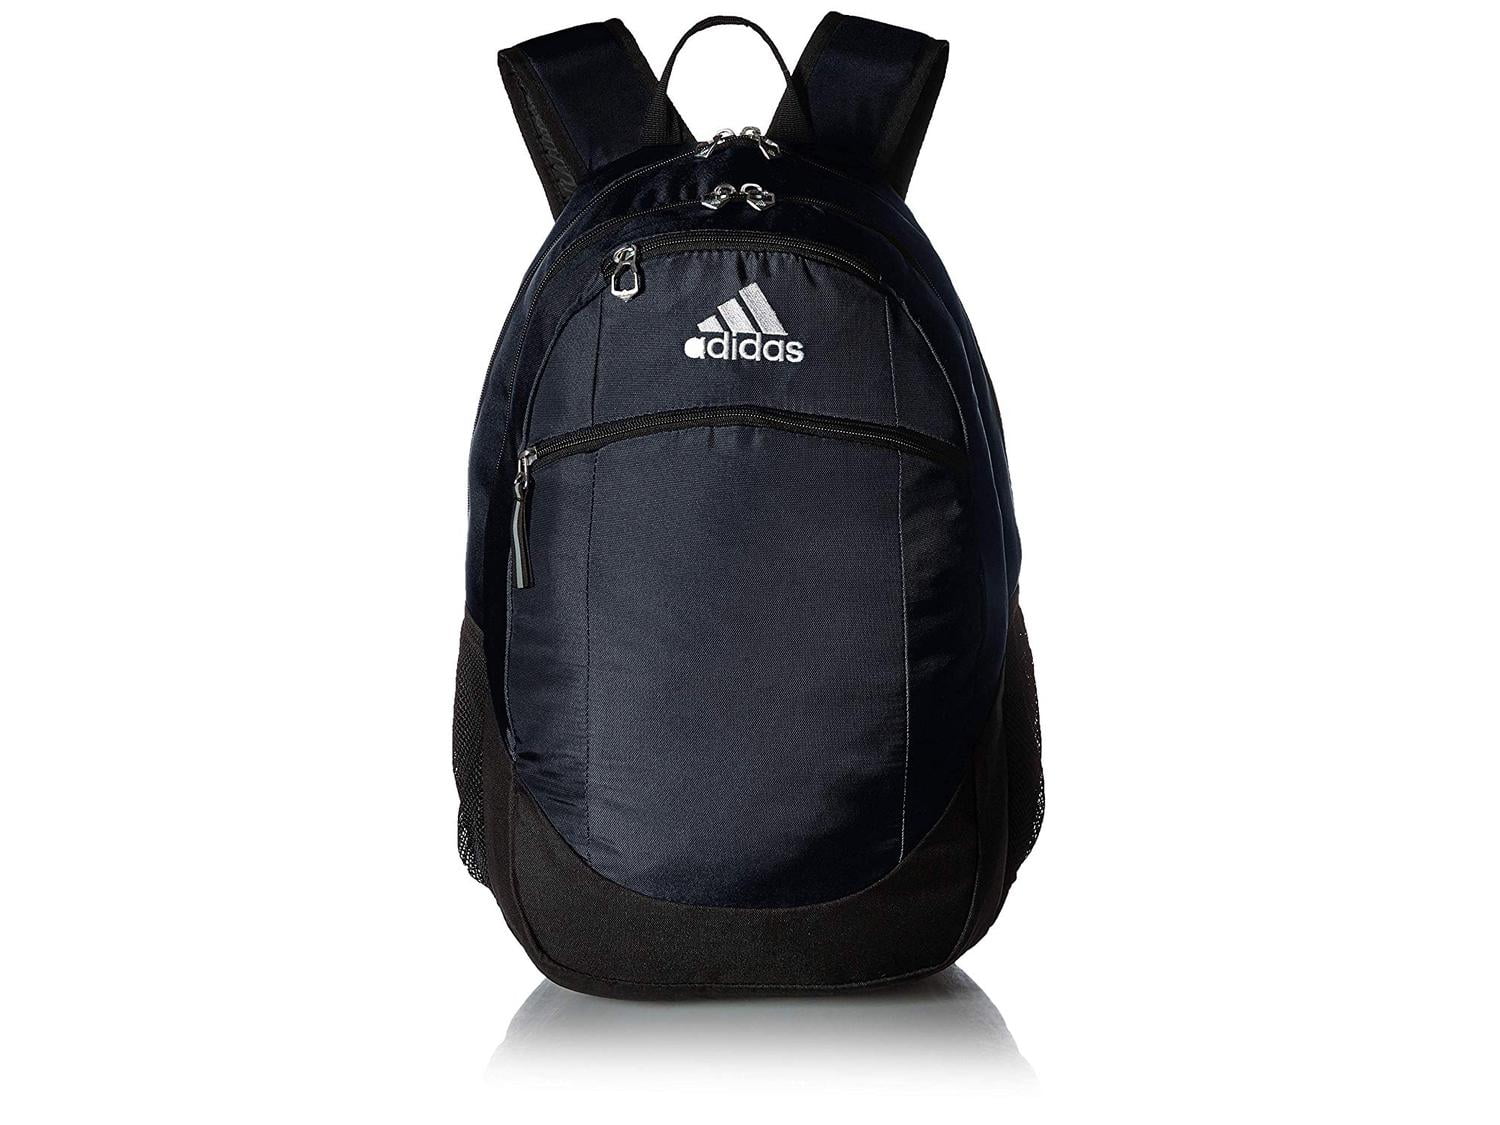 adidas Excel Backpack, Jersey White/Glow Blue, One Size - Walmart.com